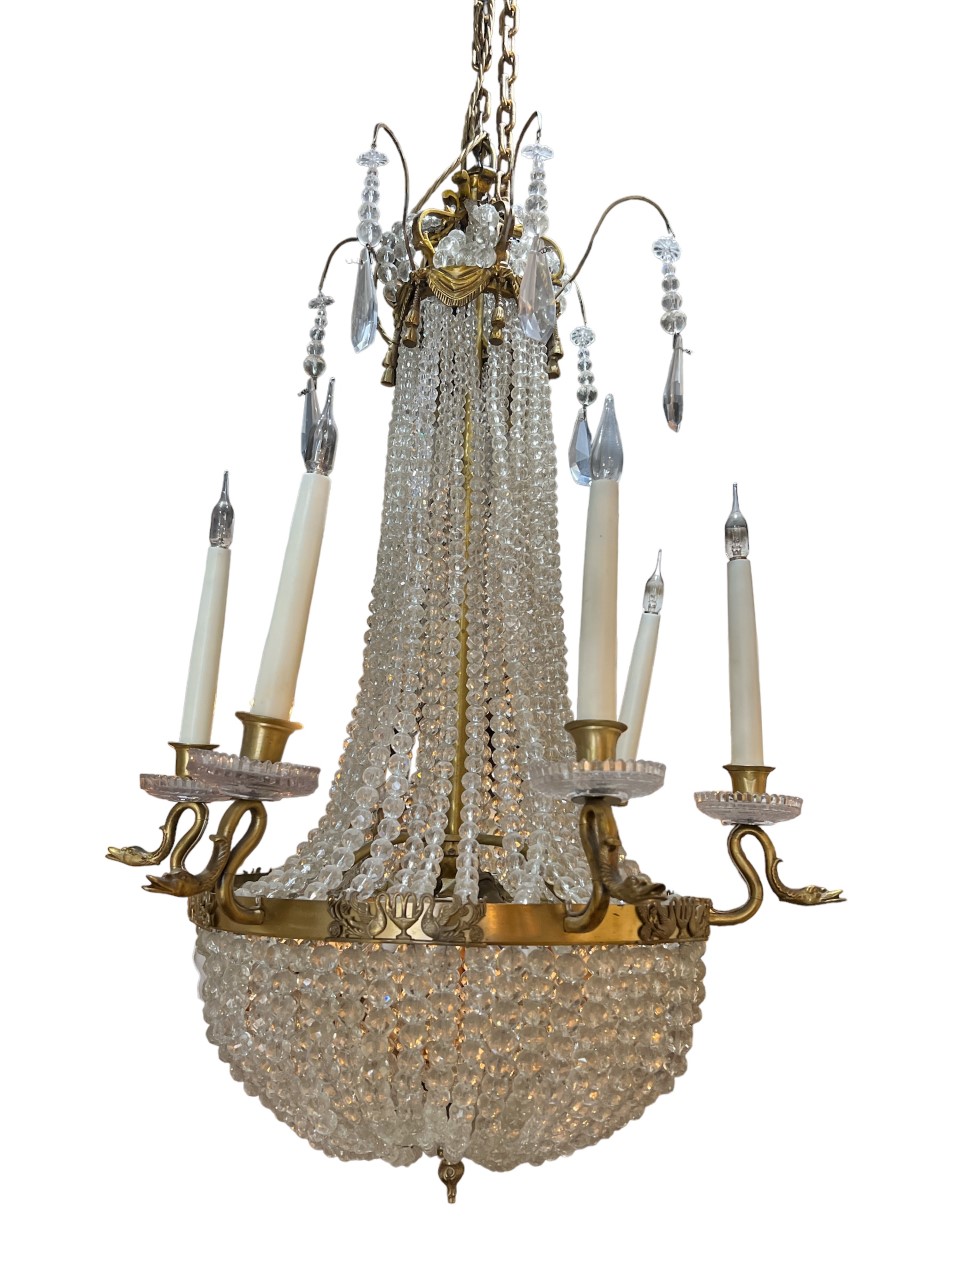 A LARGE LATE 19TH CENTURY SIX BRANCH FRENCH REGENCY DESIGN GILT ORMOLU AND GLASS BASKET CHANDELIER